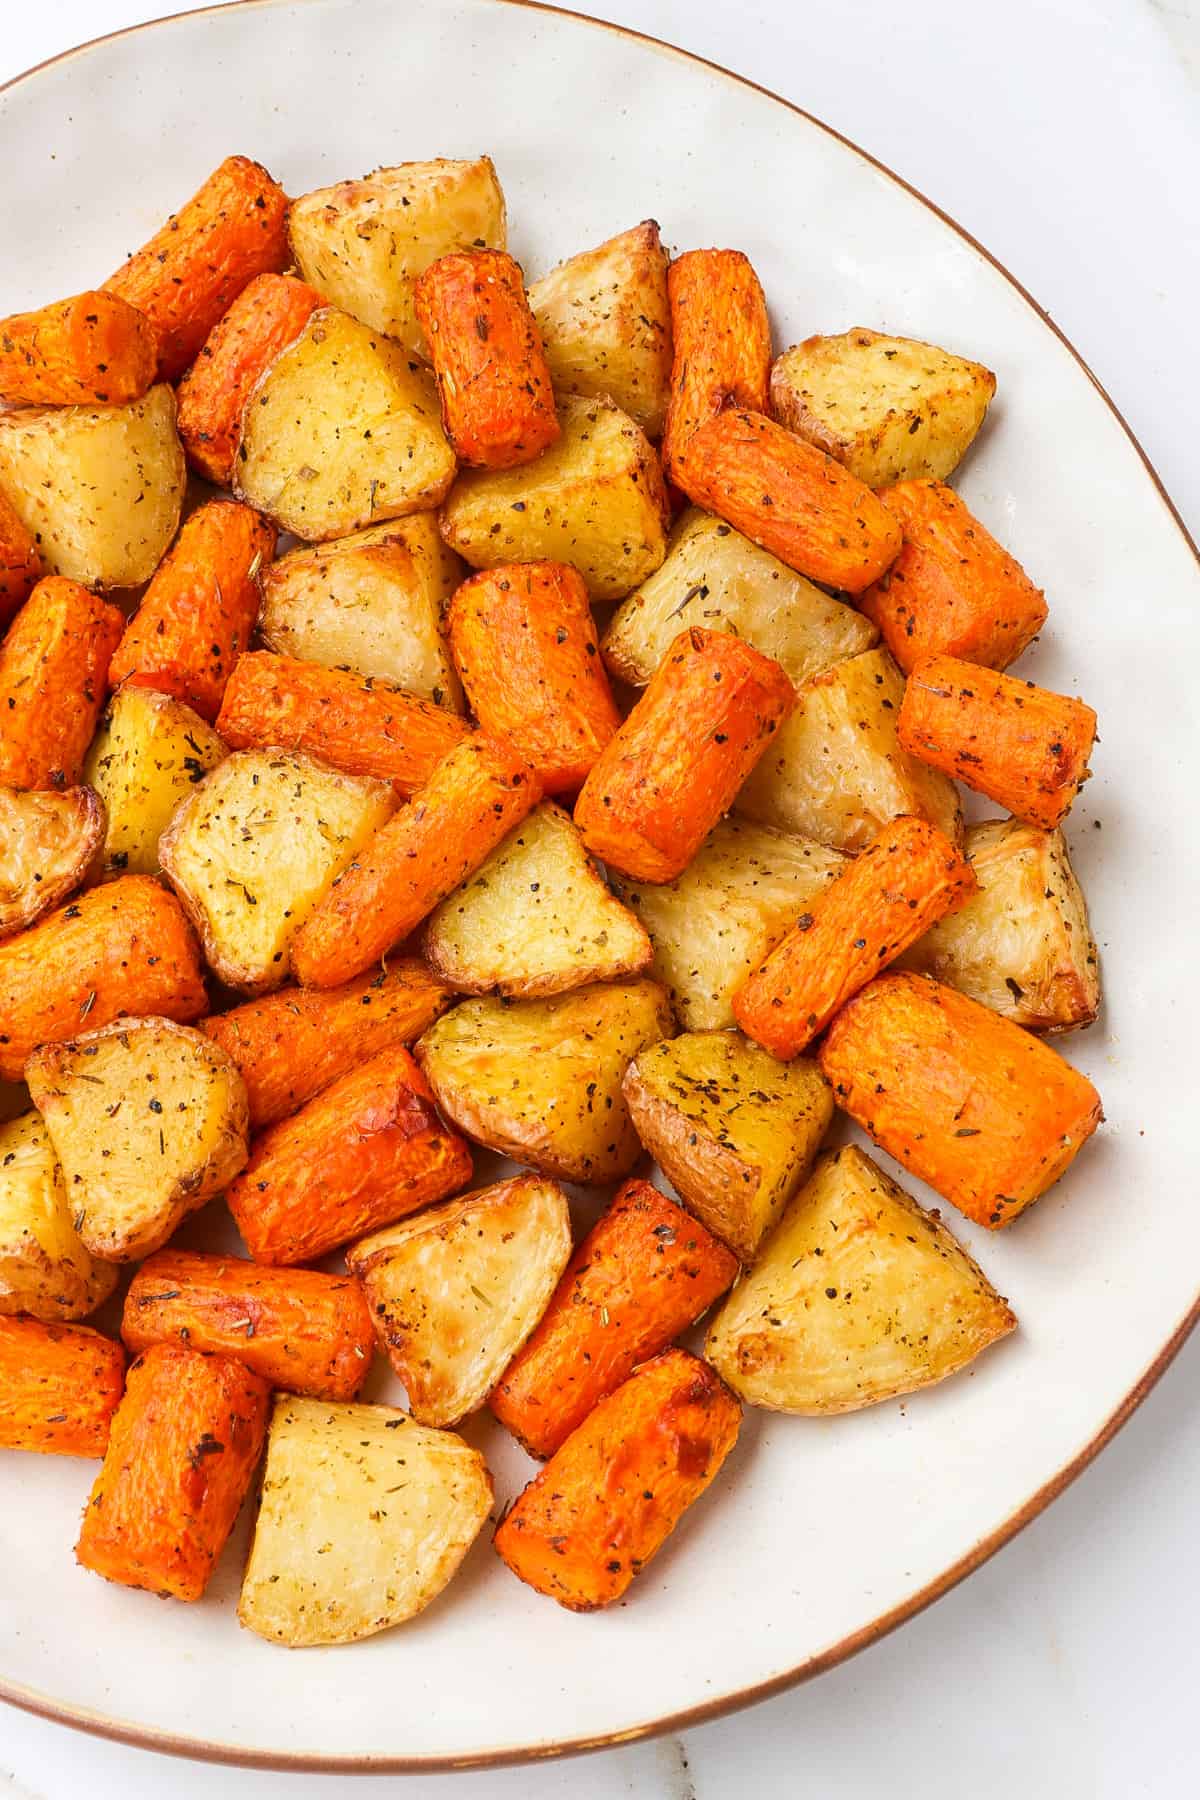 Close up shot of roasted carrots and potatoes.